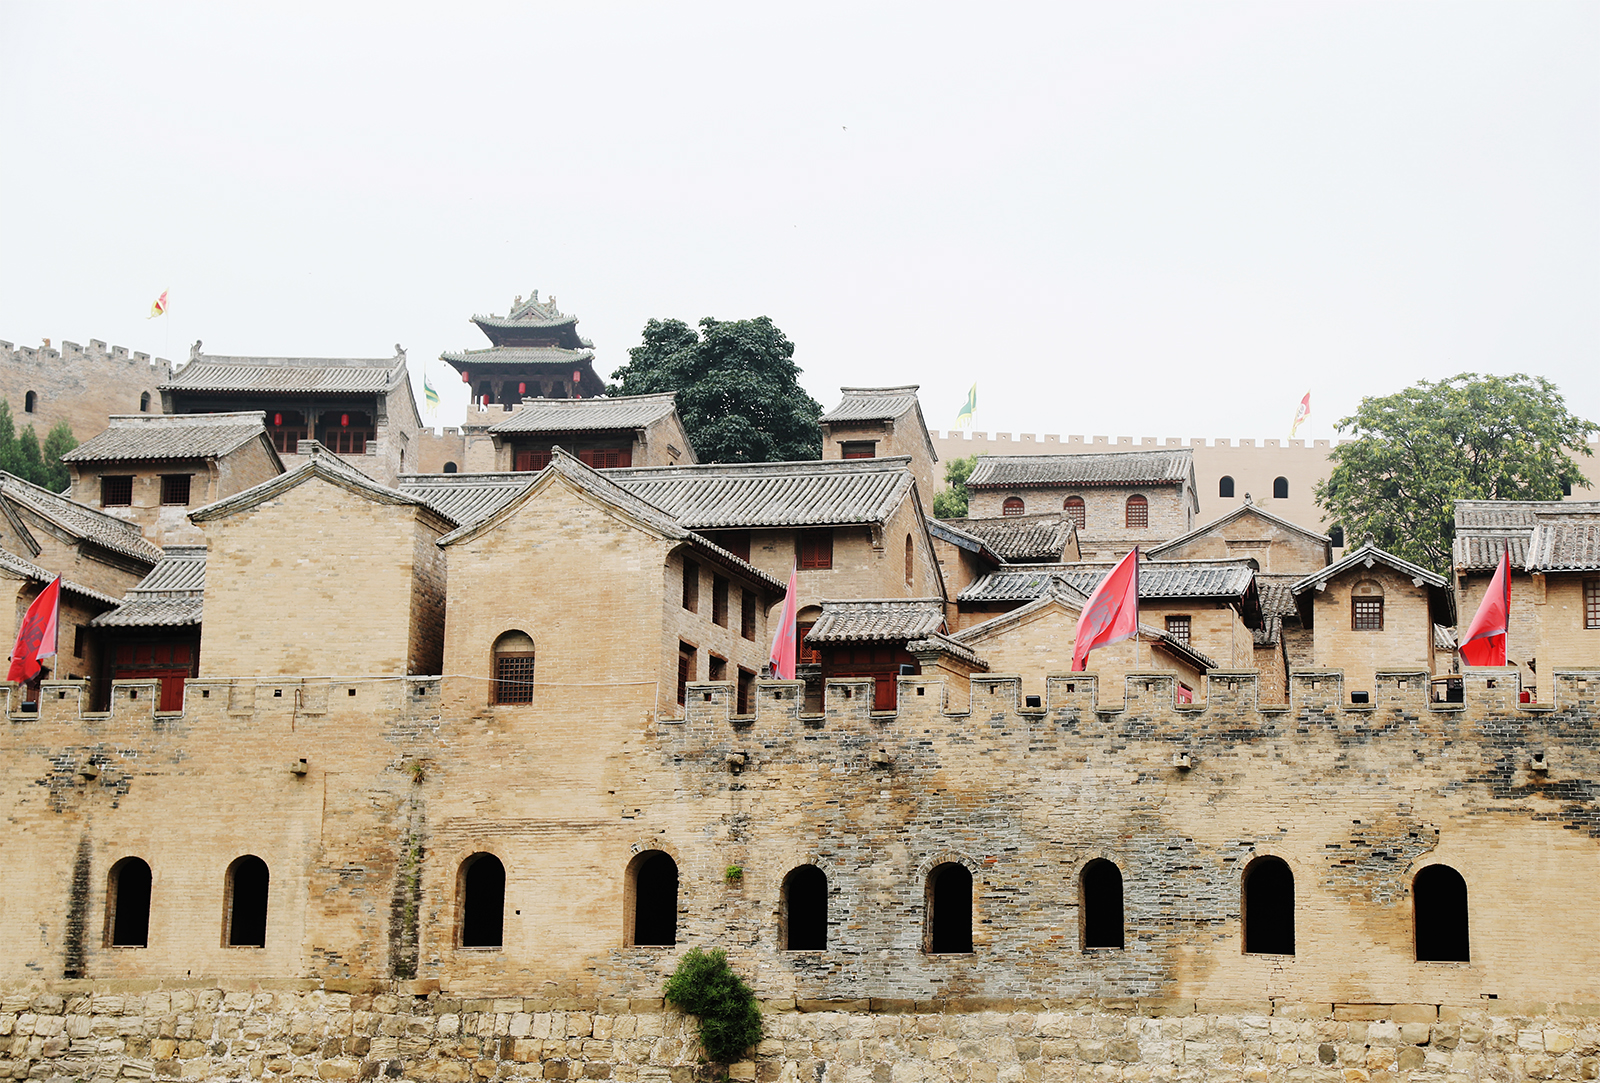 The architecture of Xiangyu Ancient Castle is orderly and harmonious. /CGTN